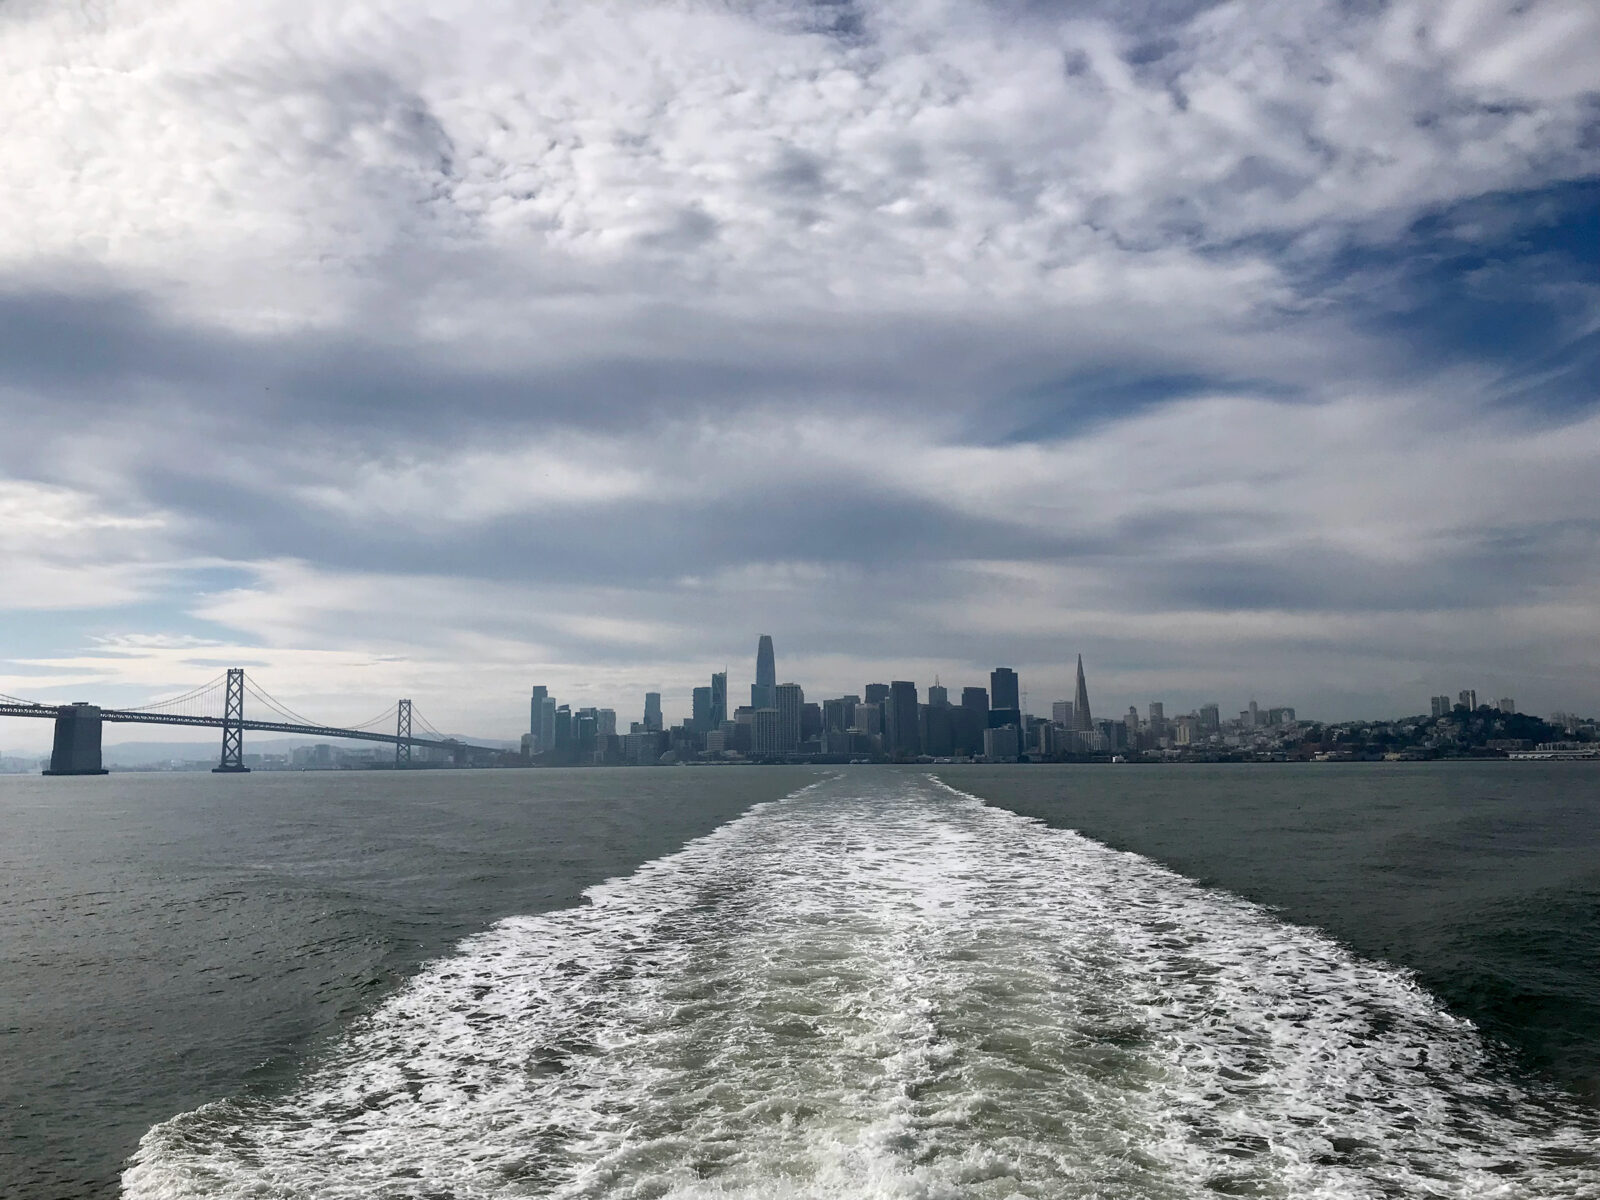 The wake of a ferry, photographed from the boat, with SF skyline in the distance